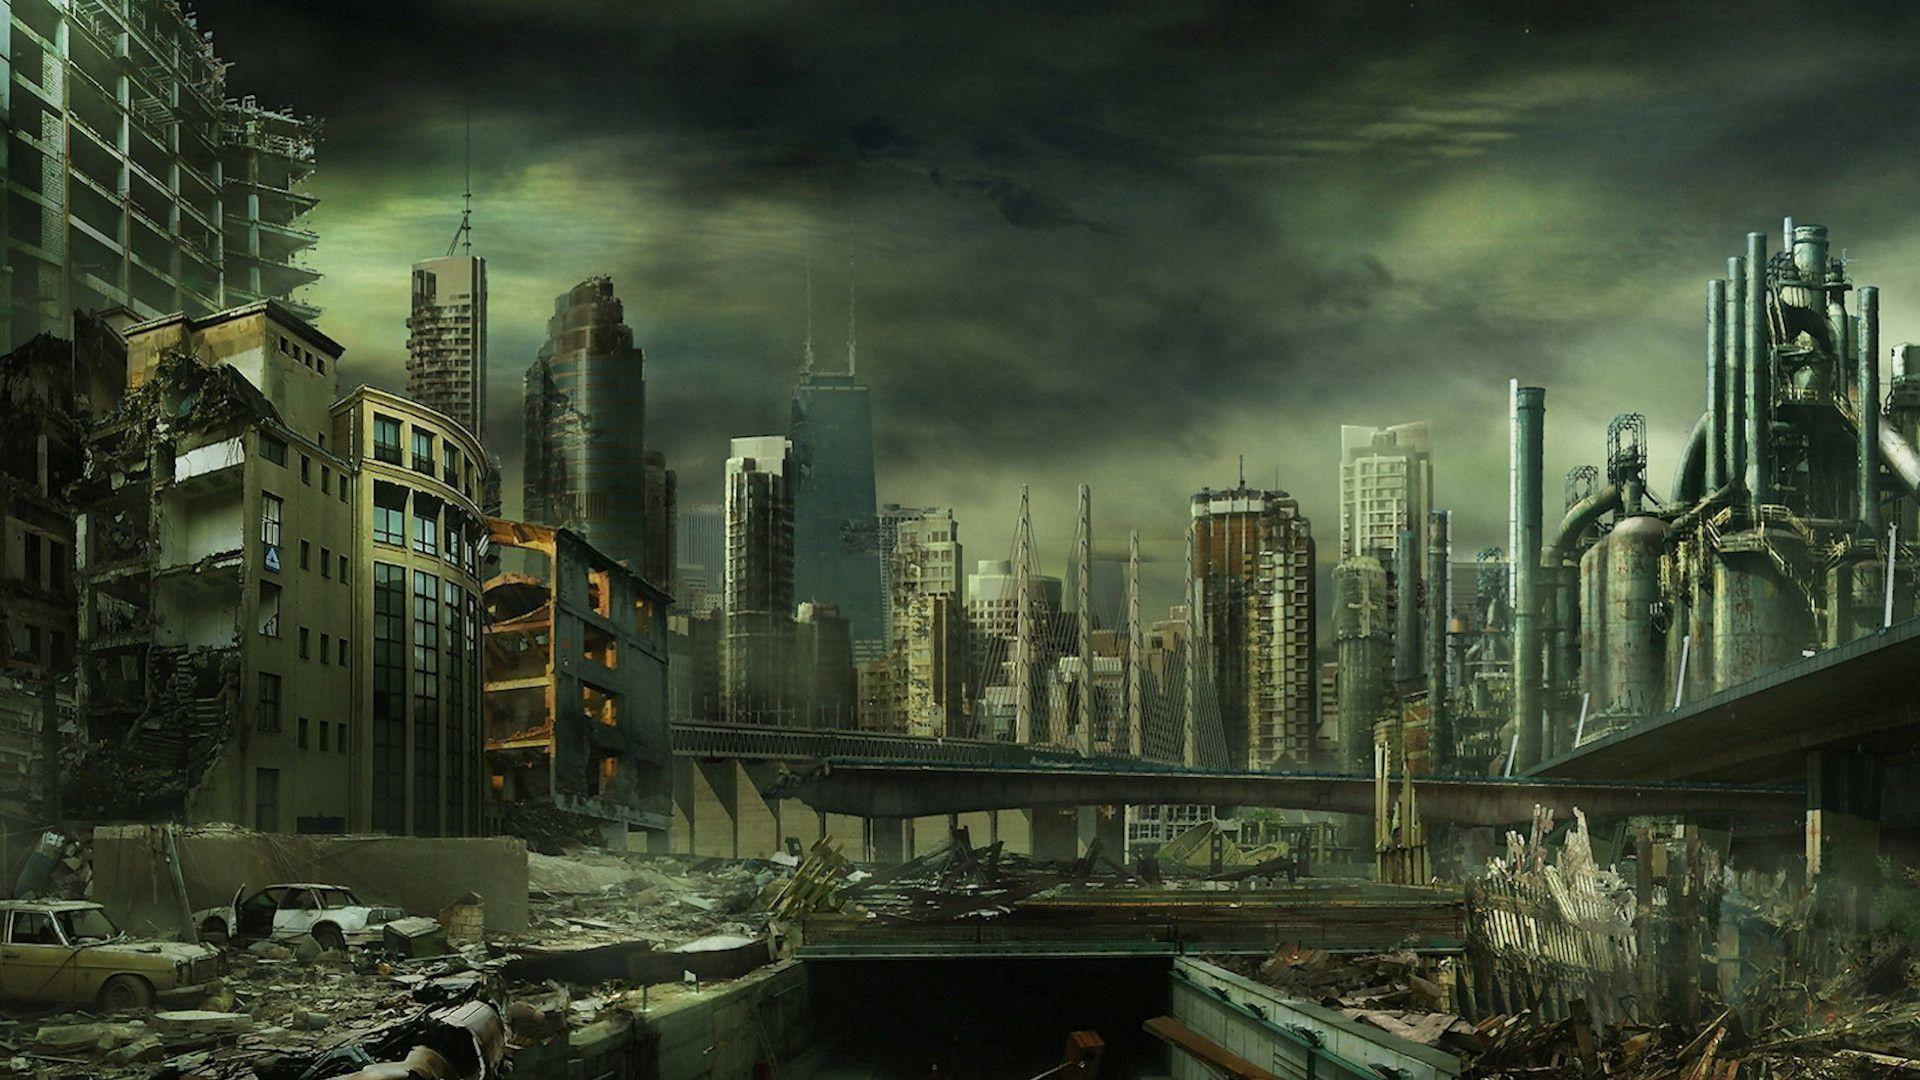 image For > Destroyed City Background HD